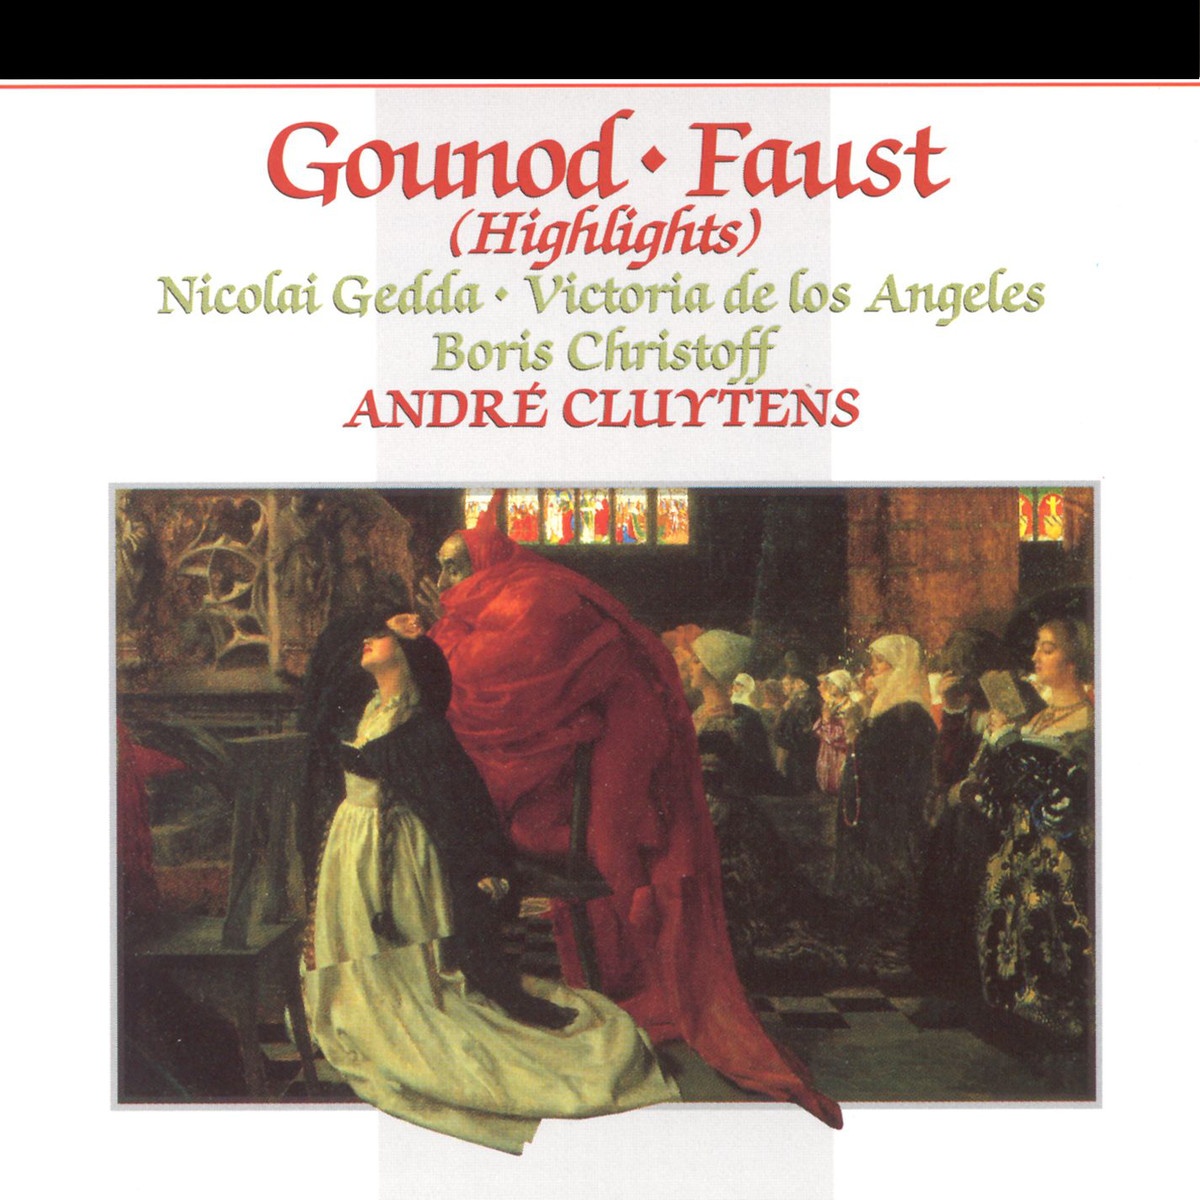 Faust - opera in five acts (1989 Digital Remaster), Act III: Il se fait tard, adieu! (Marguerite/Faust)